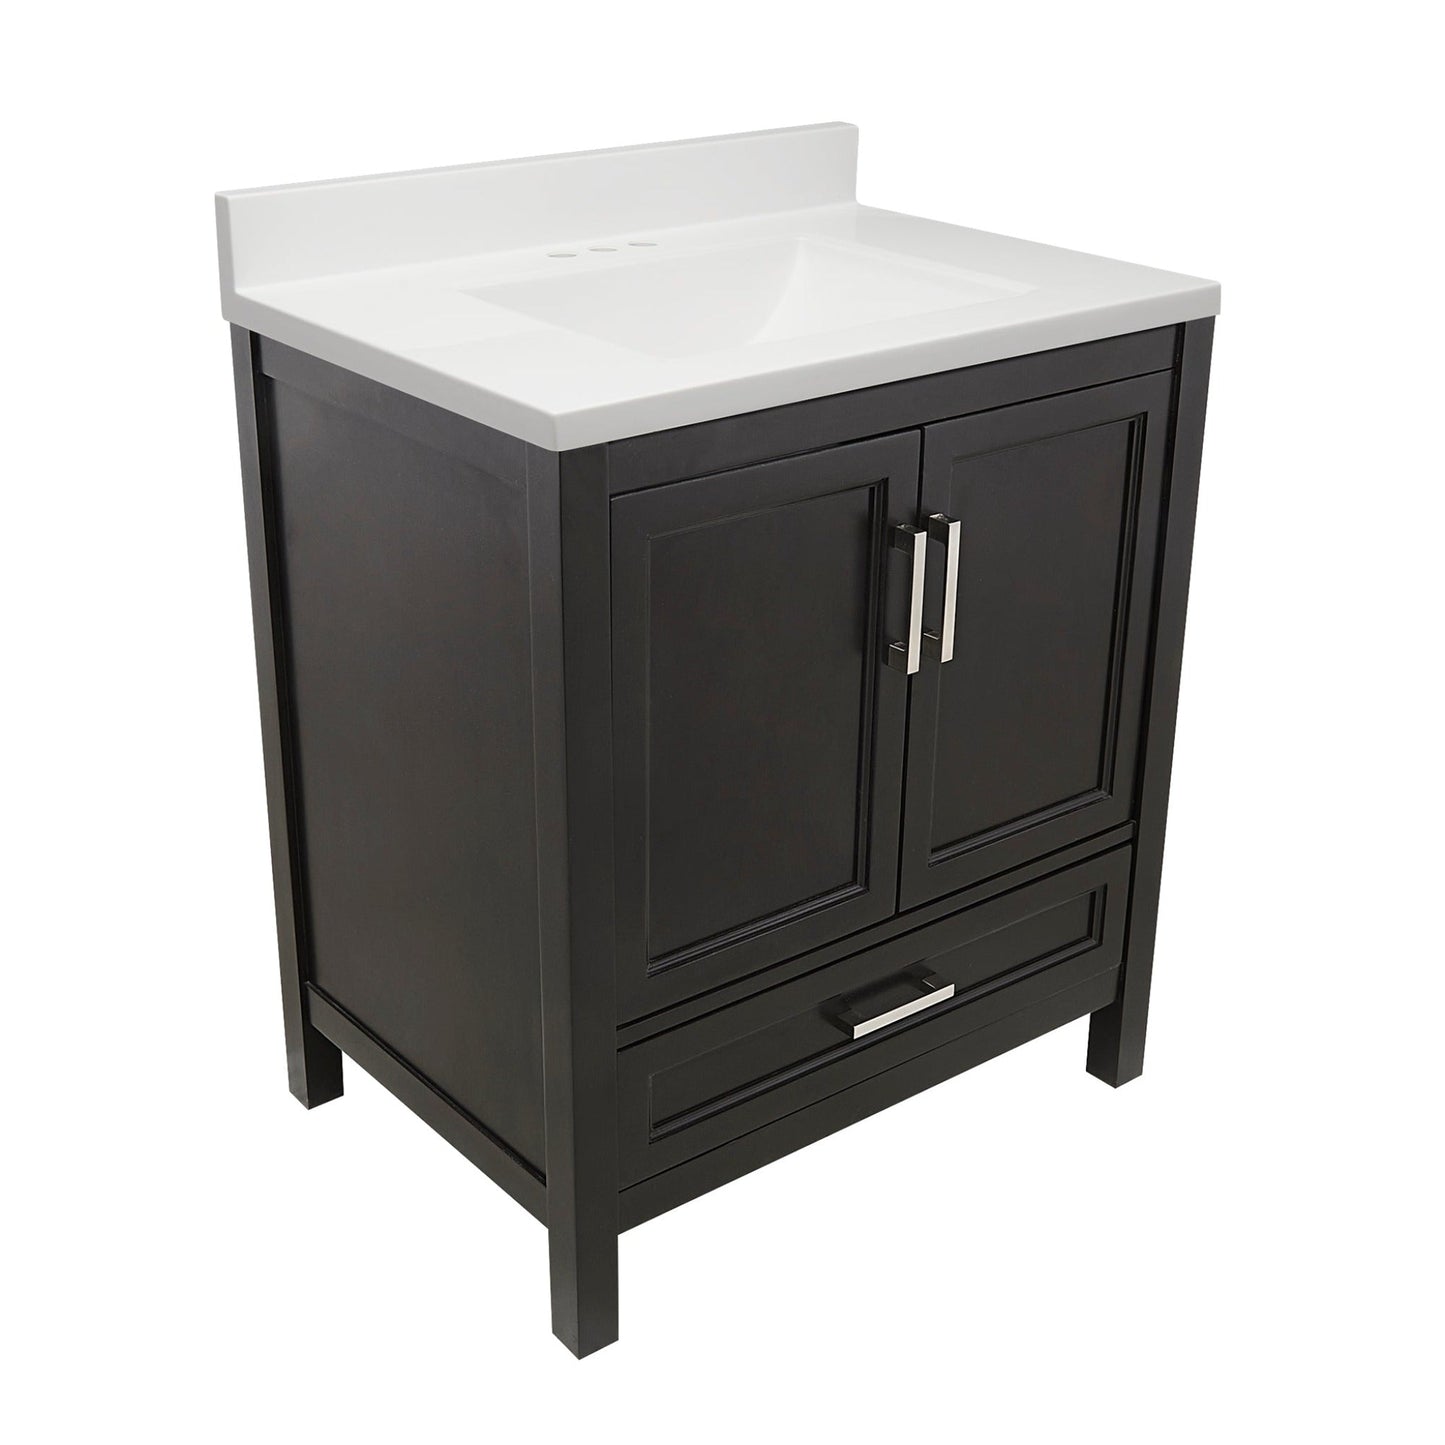 Ella’s Bubbles Nevado 31" Espresso Bathroom Vanity With White Cultured Marble Top With White Backsplash and Sink